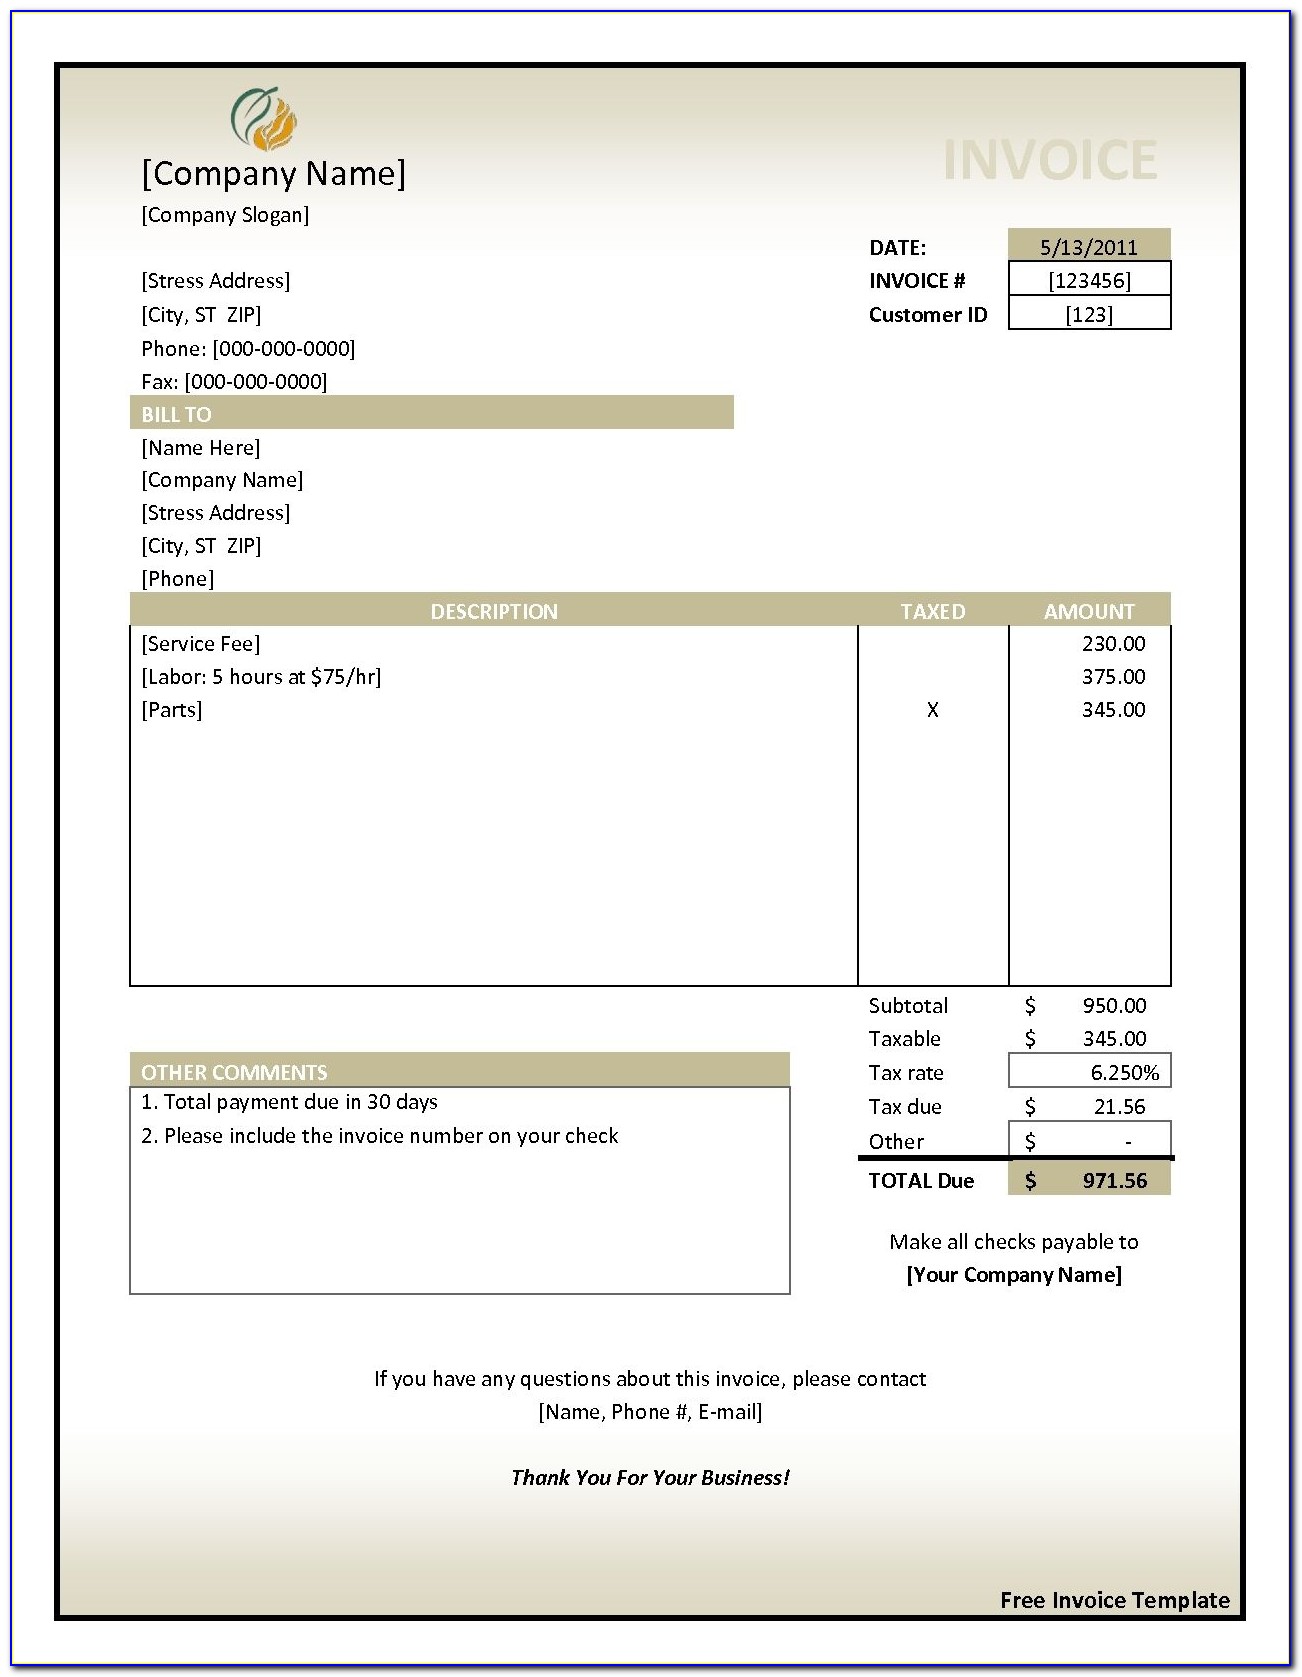 Free Invoice Template For Mac Textedit